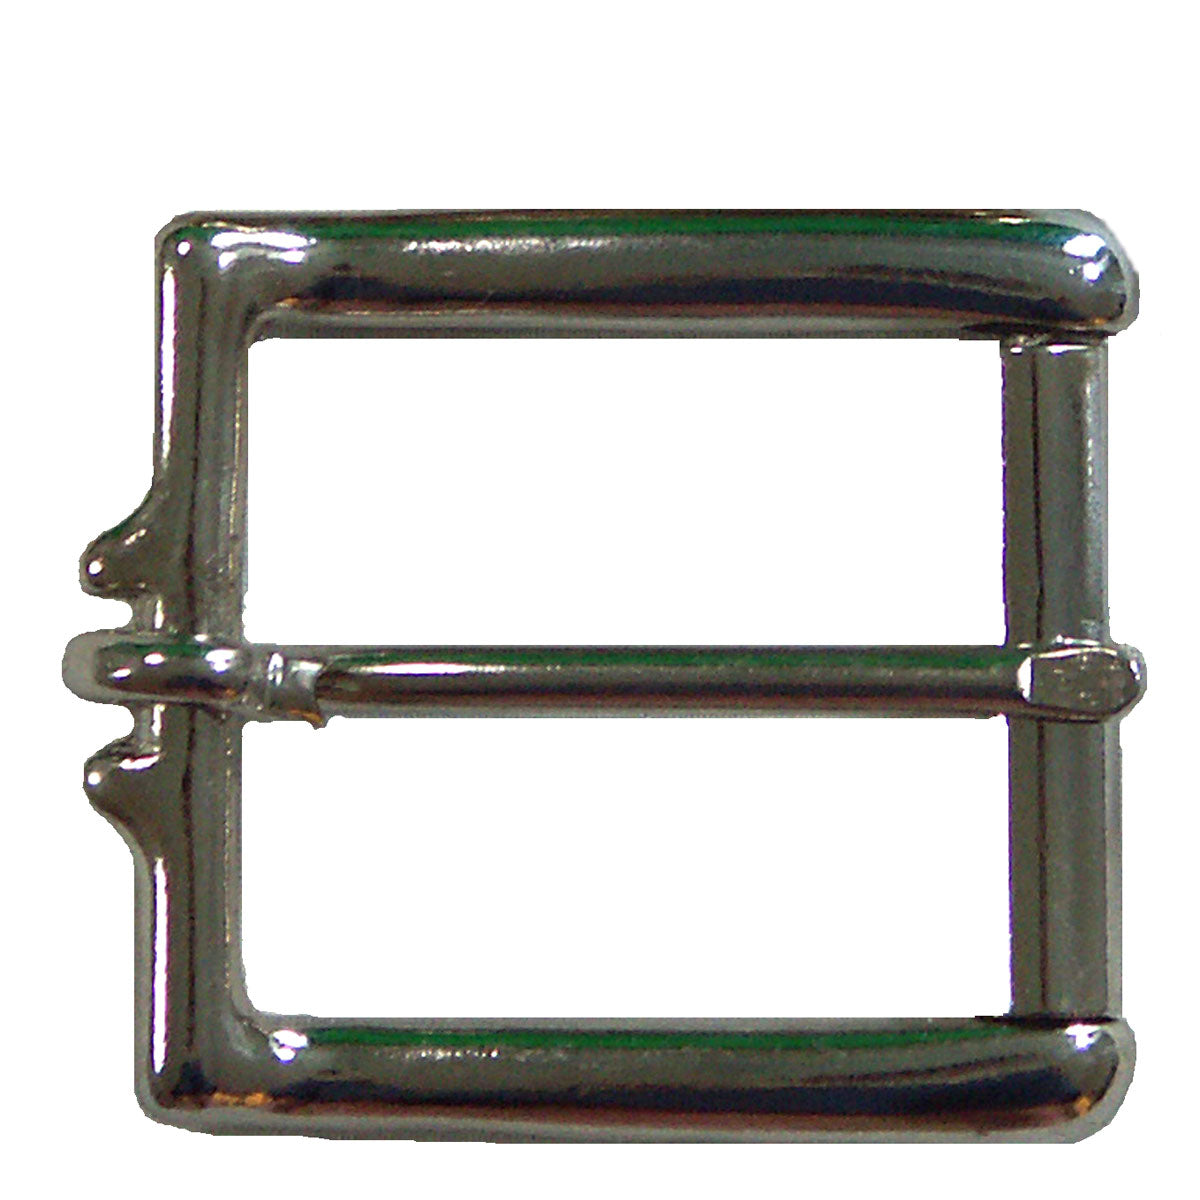 #49 Stainless Steel Buckle 7/8" with 3.5mm Stainless Steel Tongue